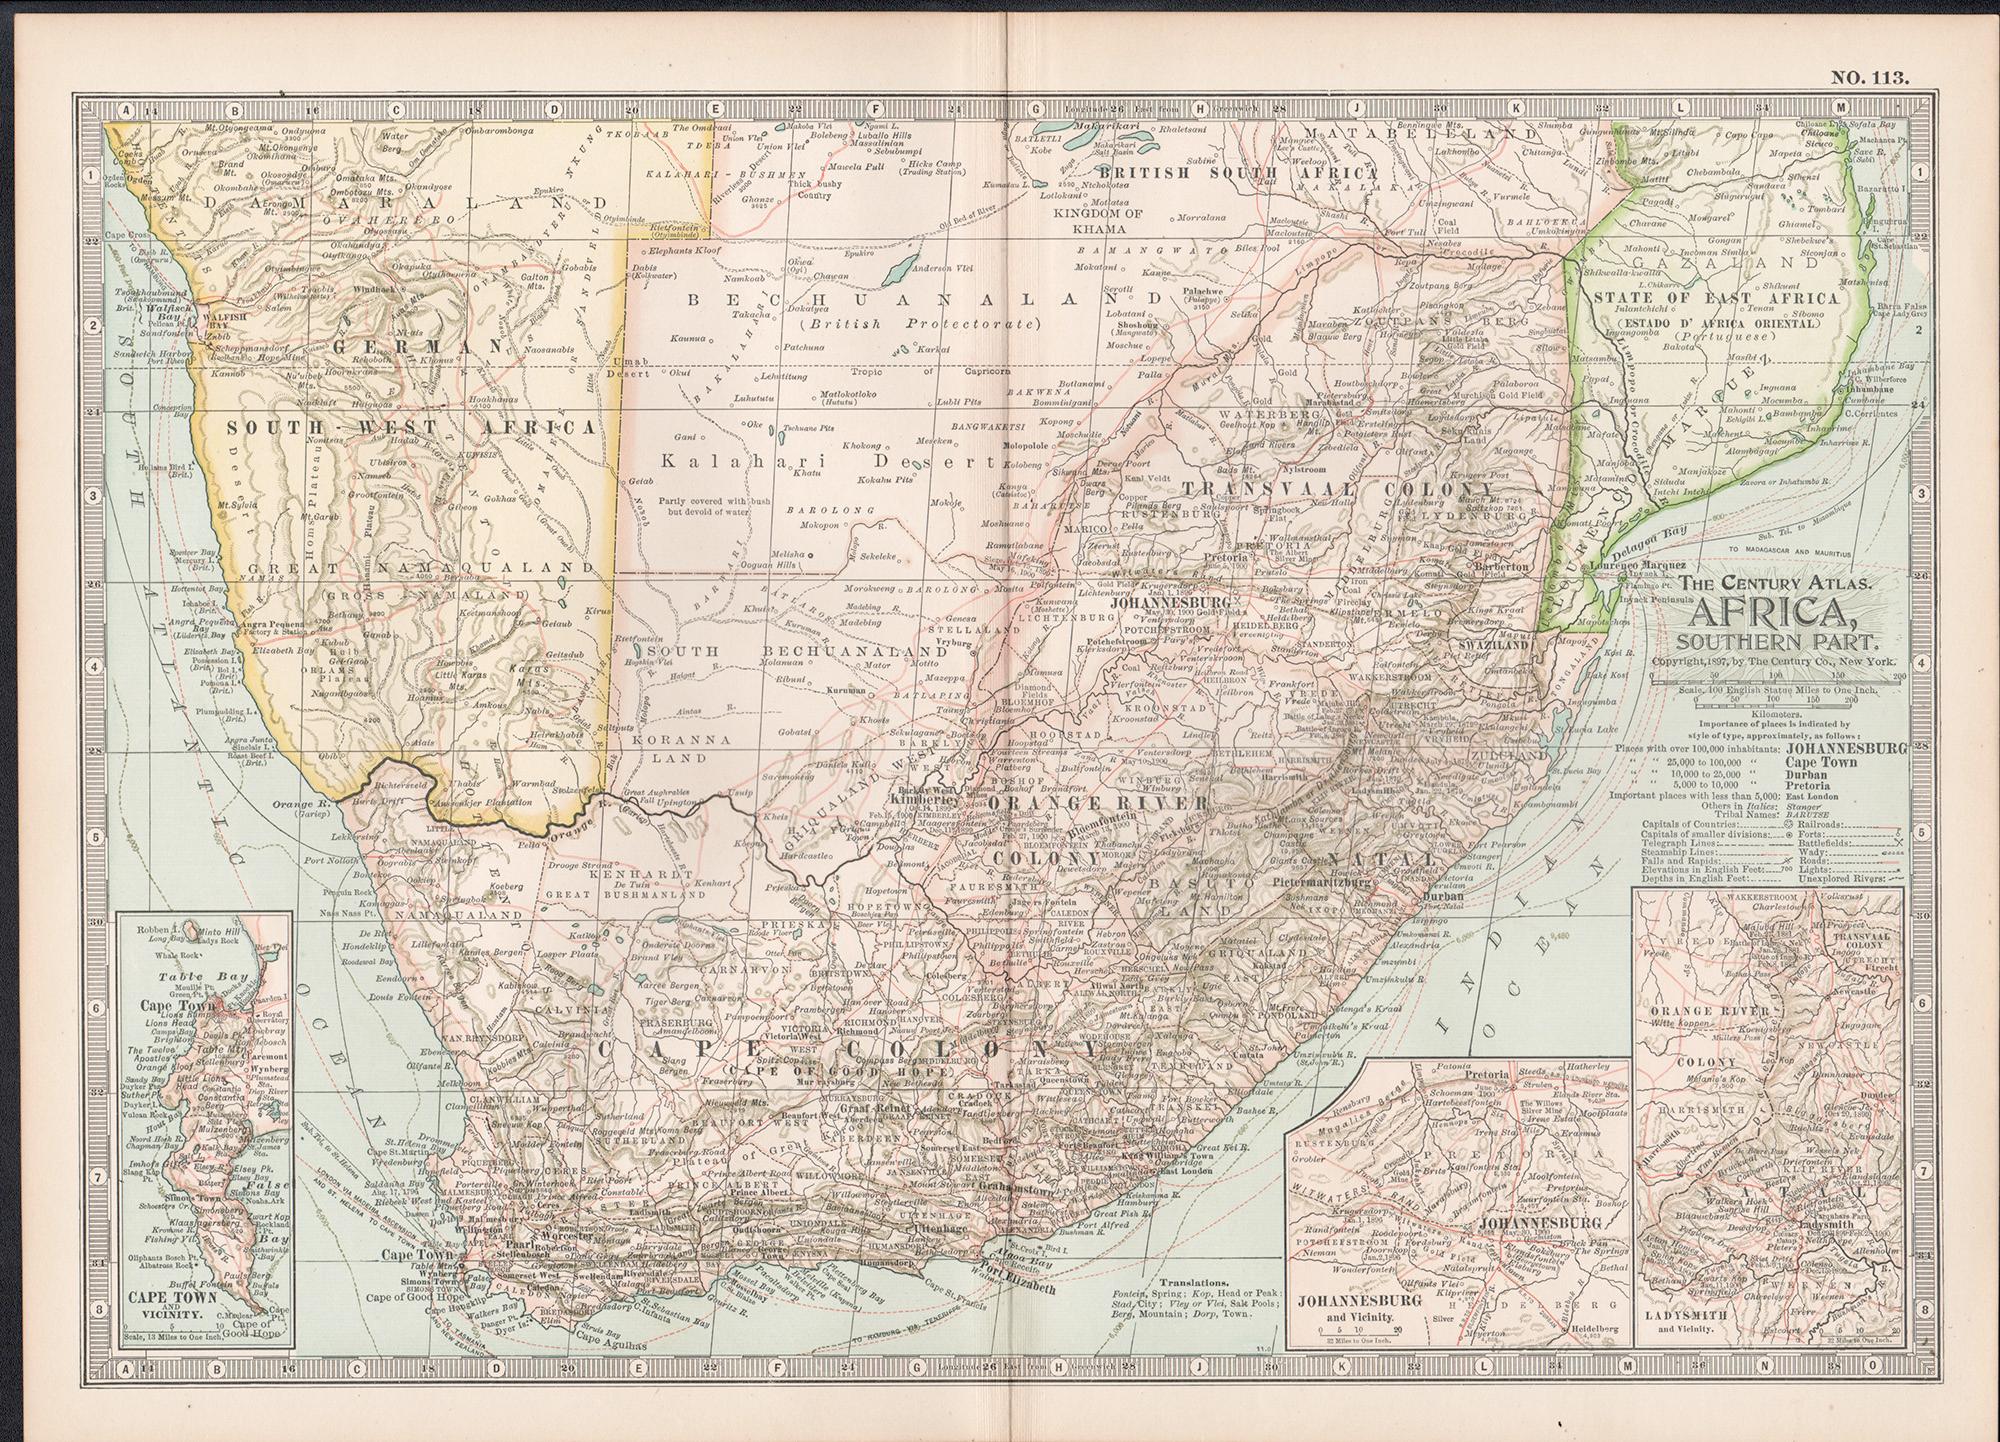 Africa. Southern Part. Century Atlas antique vintage map - Print by Unknown